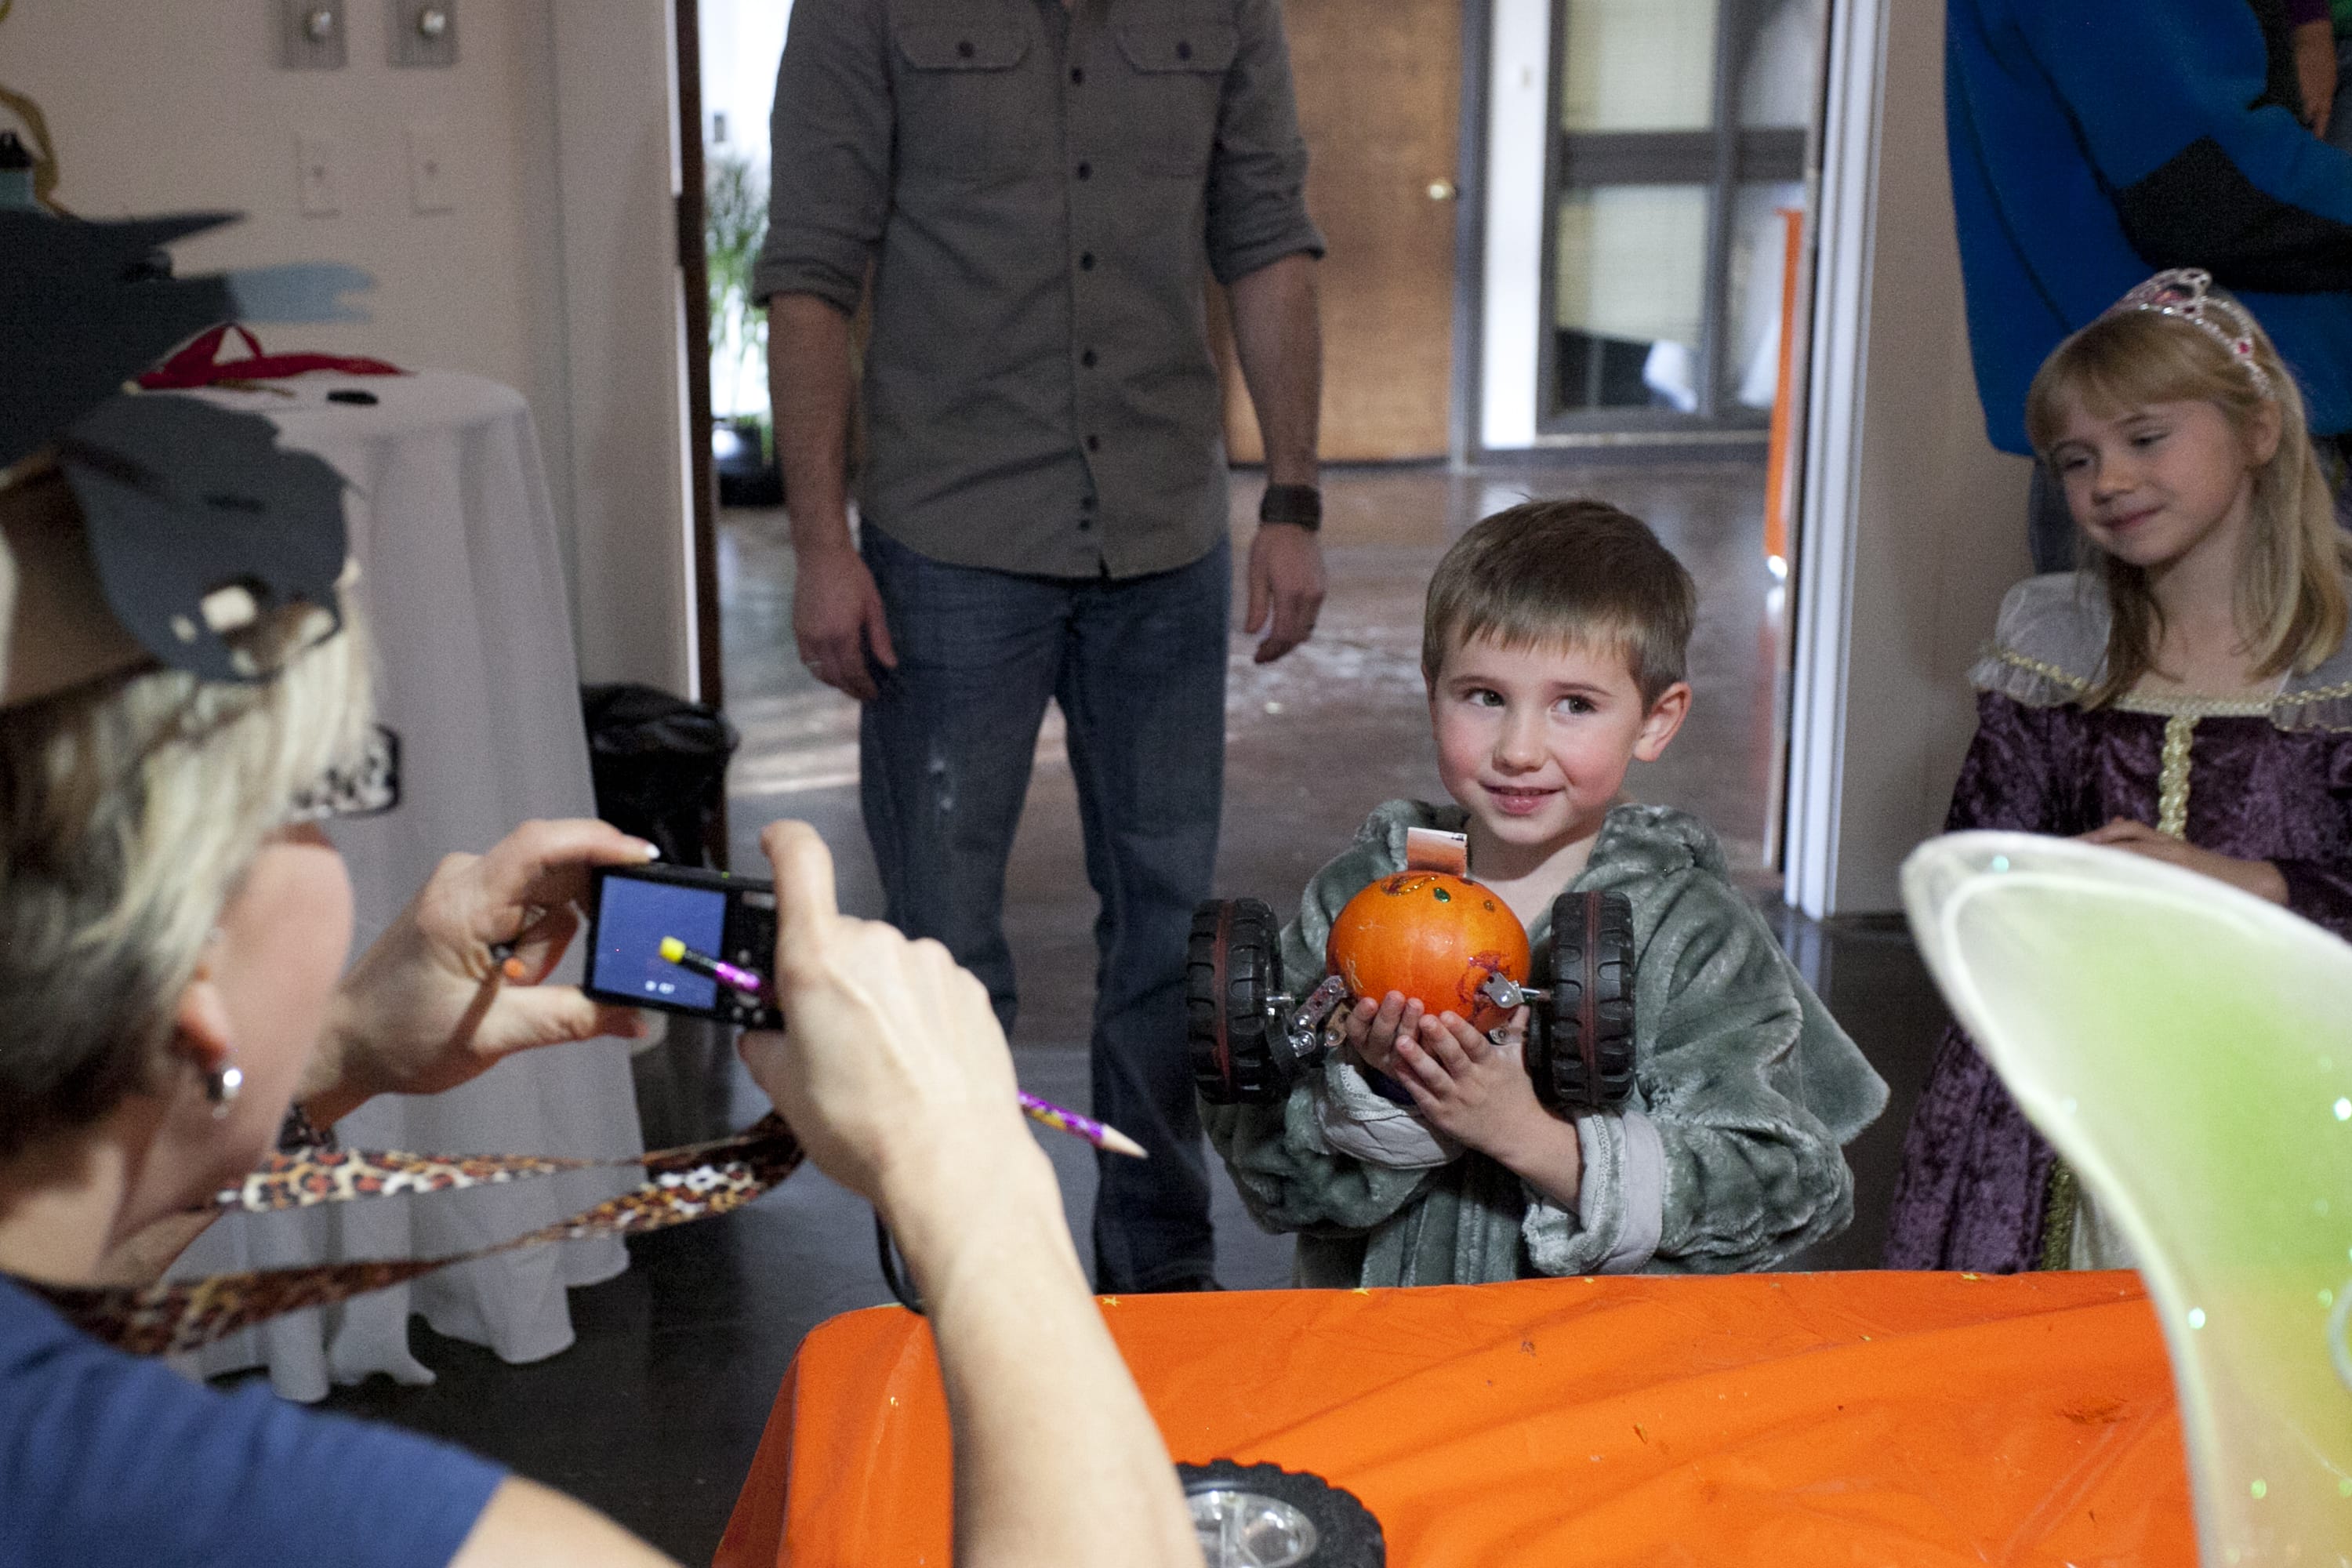 John Snapp, 4, gets his picture taken with his derby pumpkin as his sister Stephanie, 6, looks on at the Screaming Pumpkin Derby.